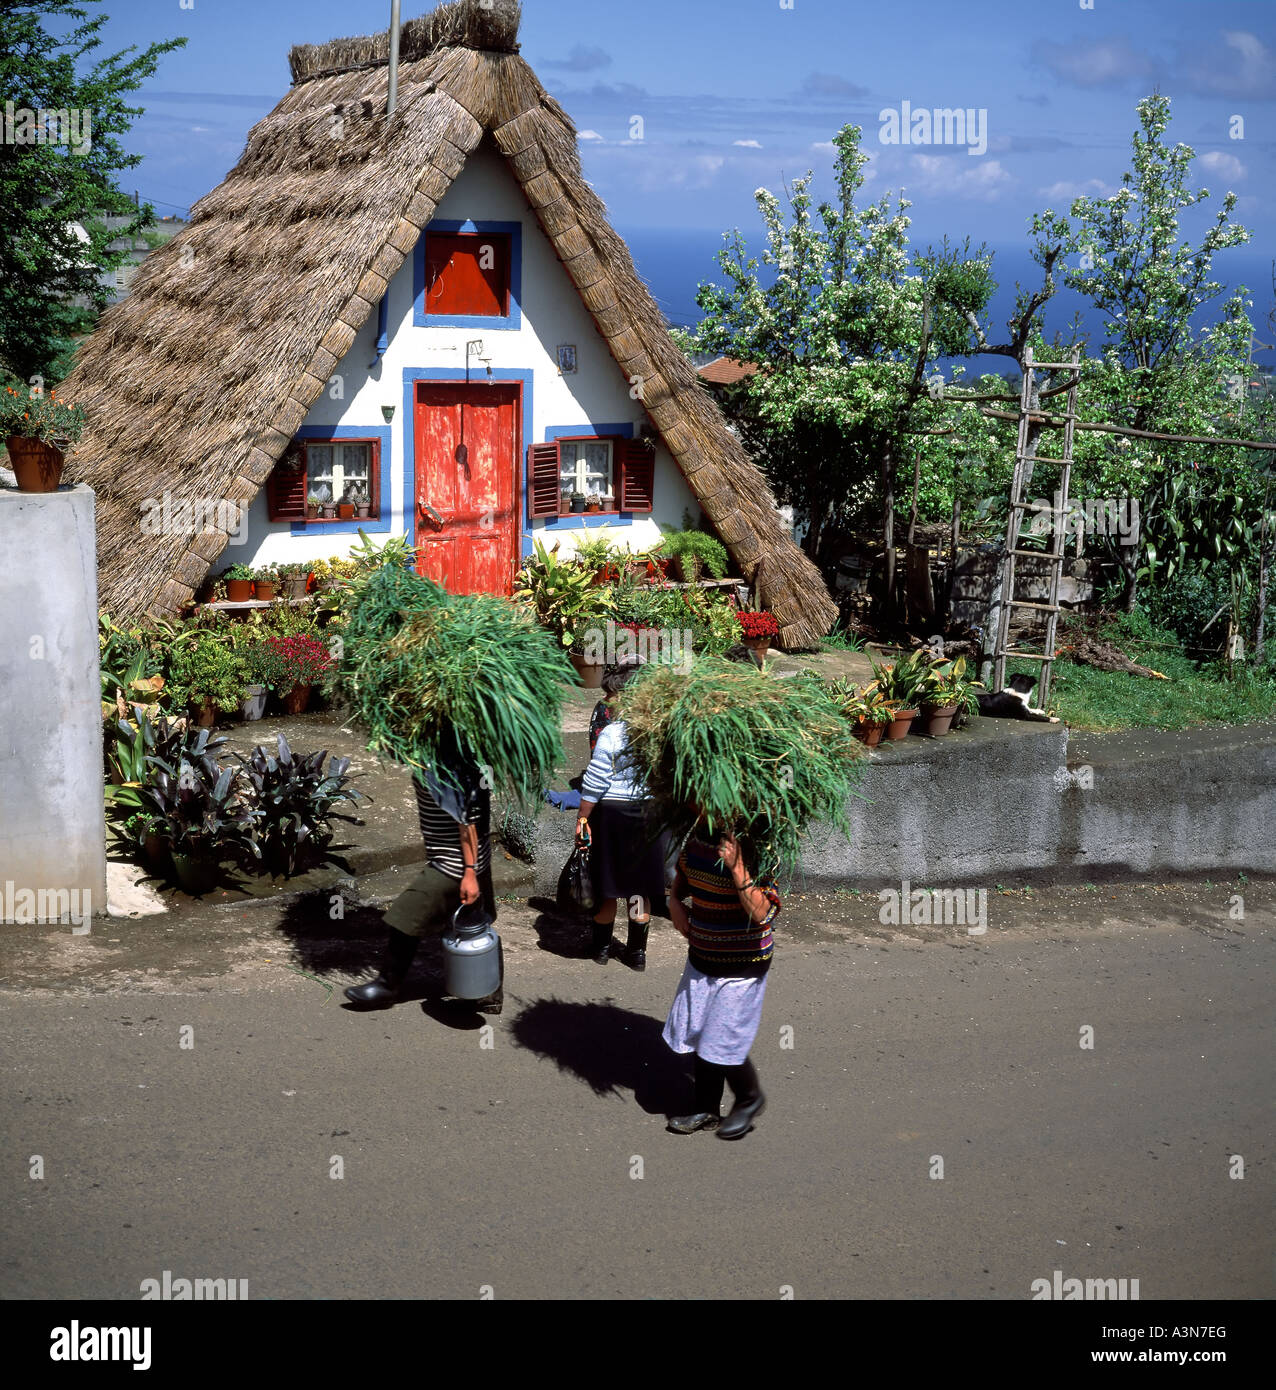 TWO WOMEN CARRYING GRASS IN FRONT OF A  PALHEIRO  TRADITIONAL THATCHED HOUSE  SANTANA  VILLAGE  MADEIRA  ISLAND PORTUGAL Stock Photo